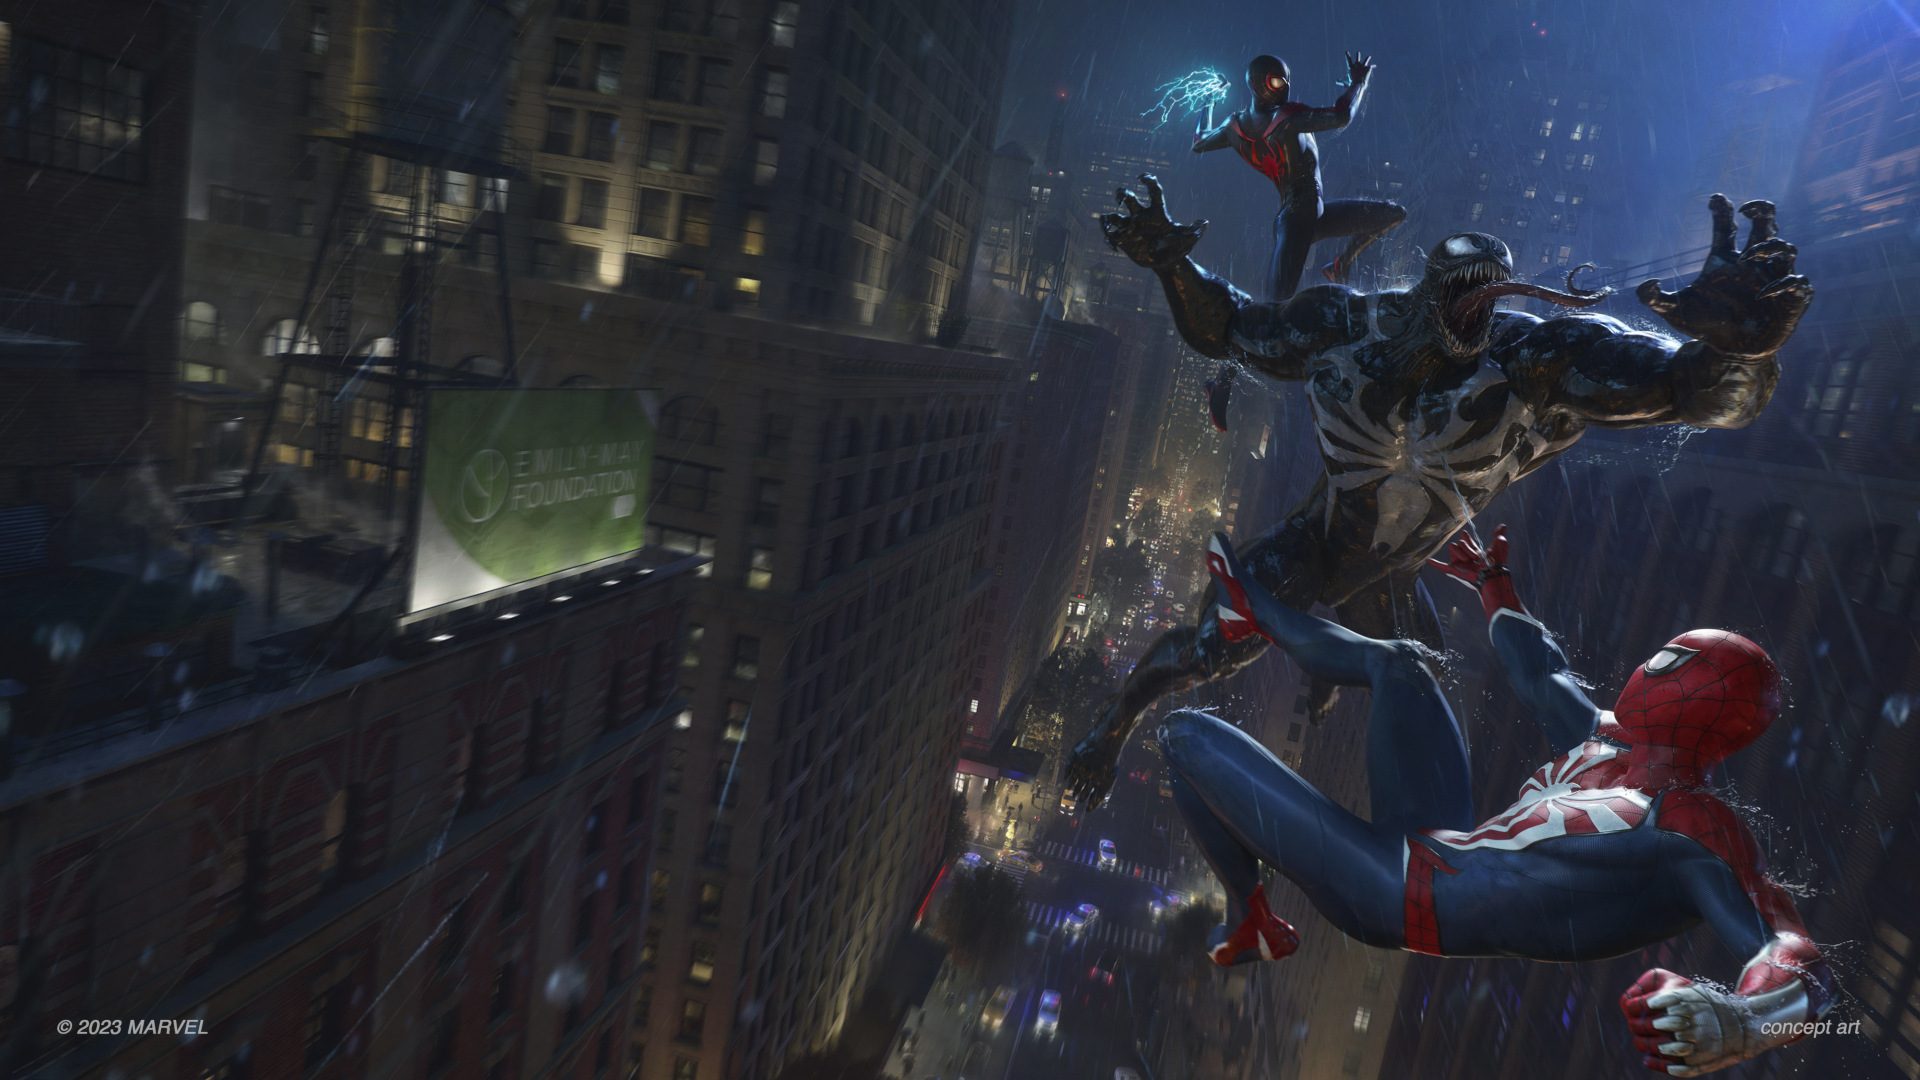 IGN on X: Marvel's Spider-Man 2 will cost $69.99, $79.99 (Digital Deluxe),  and $229.99 (Collector's Edition). Which version are you getting?  #IGNSummerOfGaming  / X